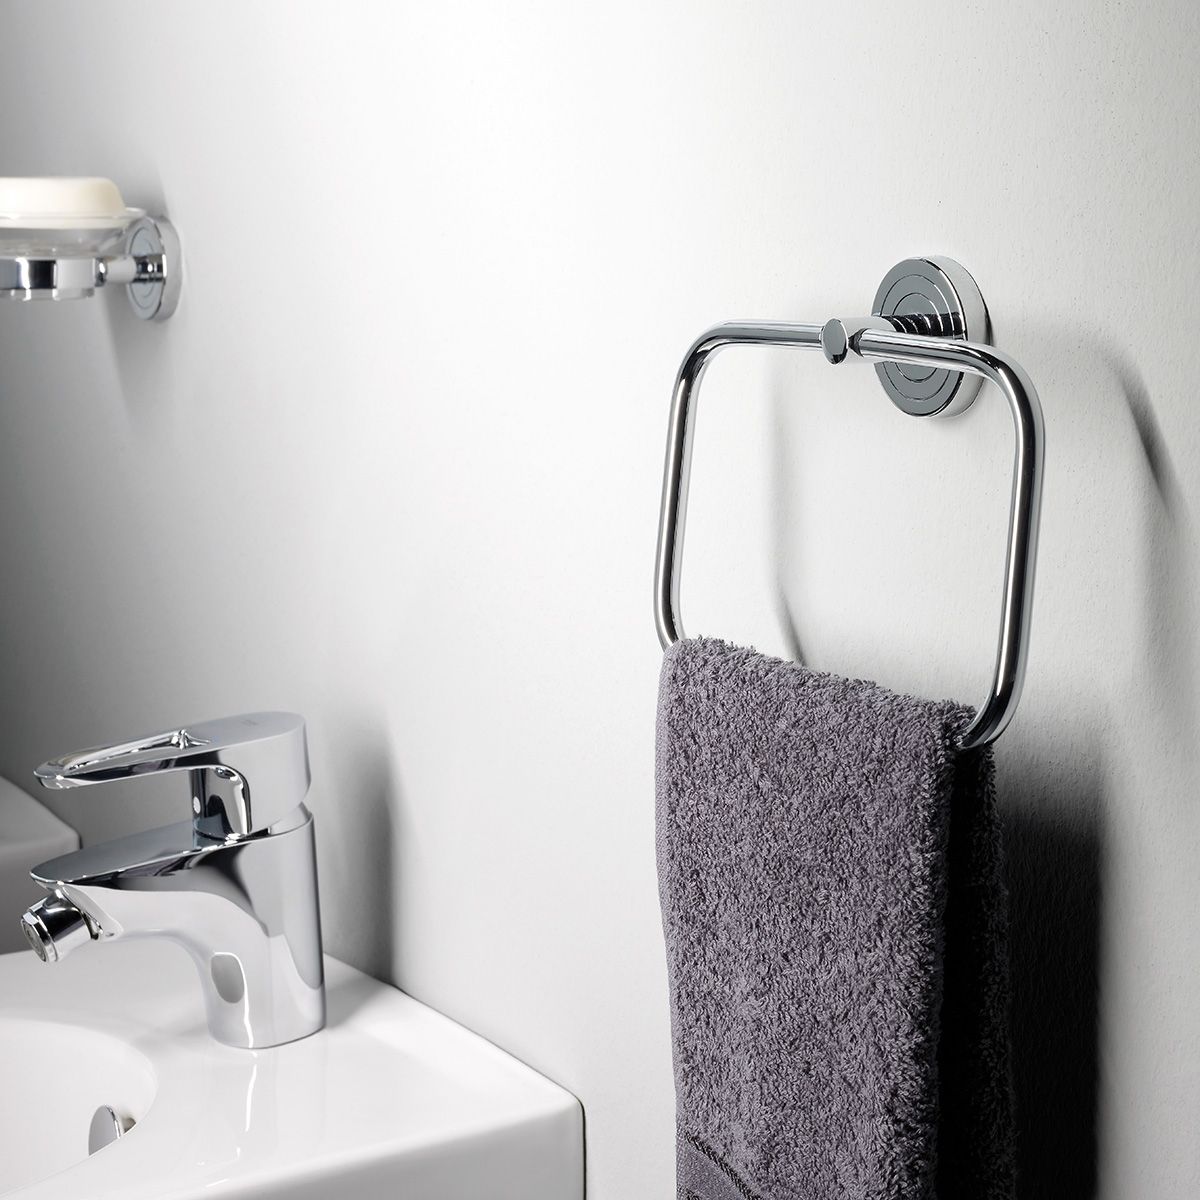 Combining Decor and Functionality in Bathroom Accessories